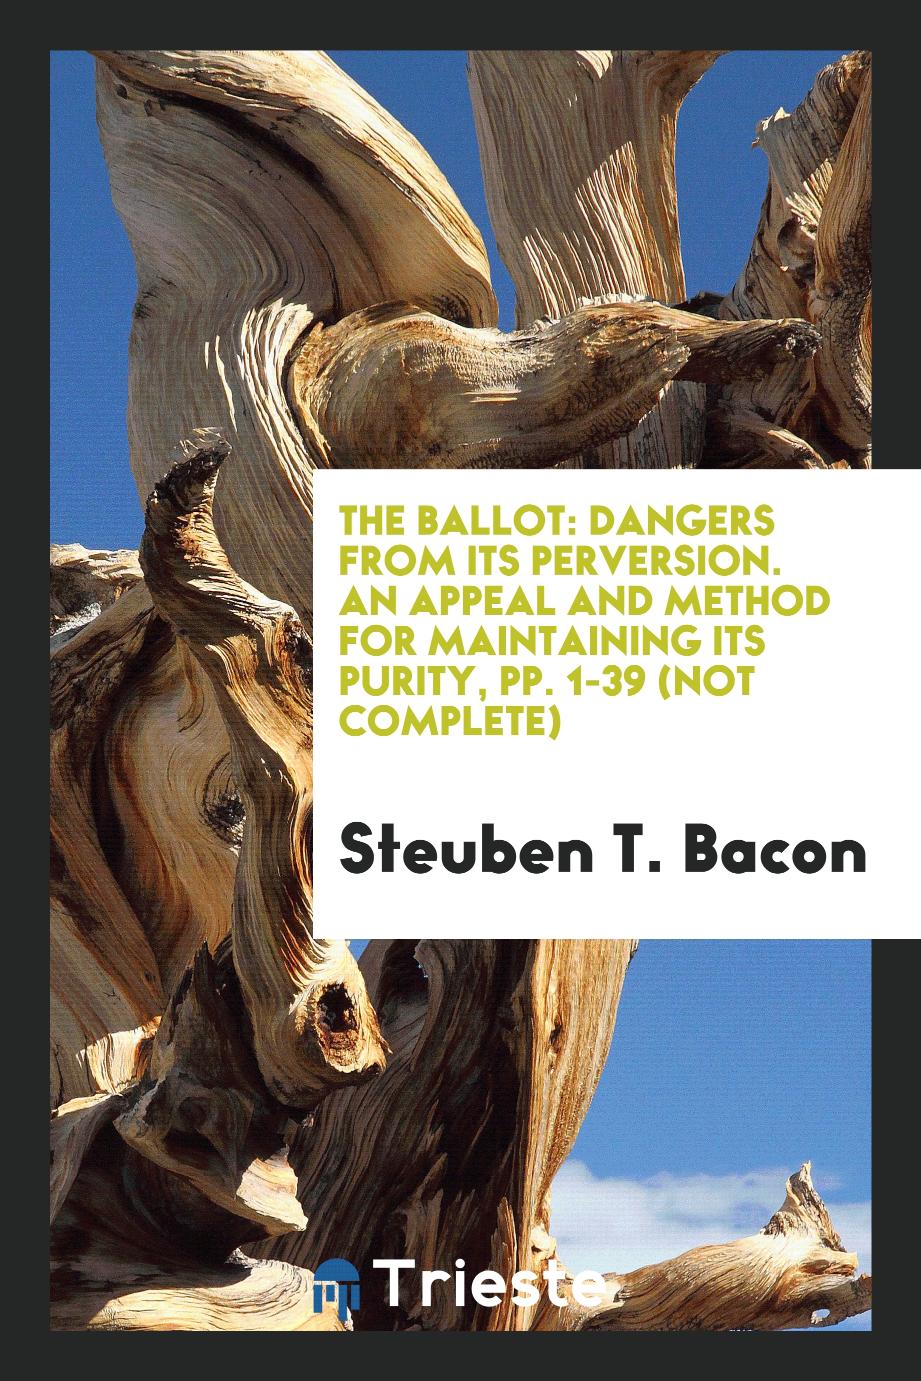 The Ballot: Dangers from Its Perversion. An Appeal and Method for Maintaining Its Purity, pp. 1-39 (not complete)